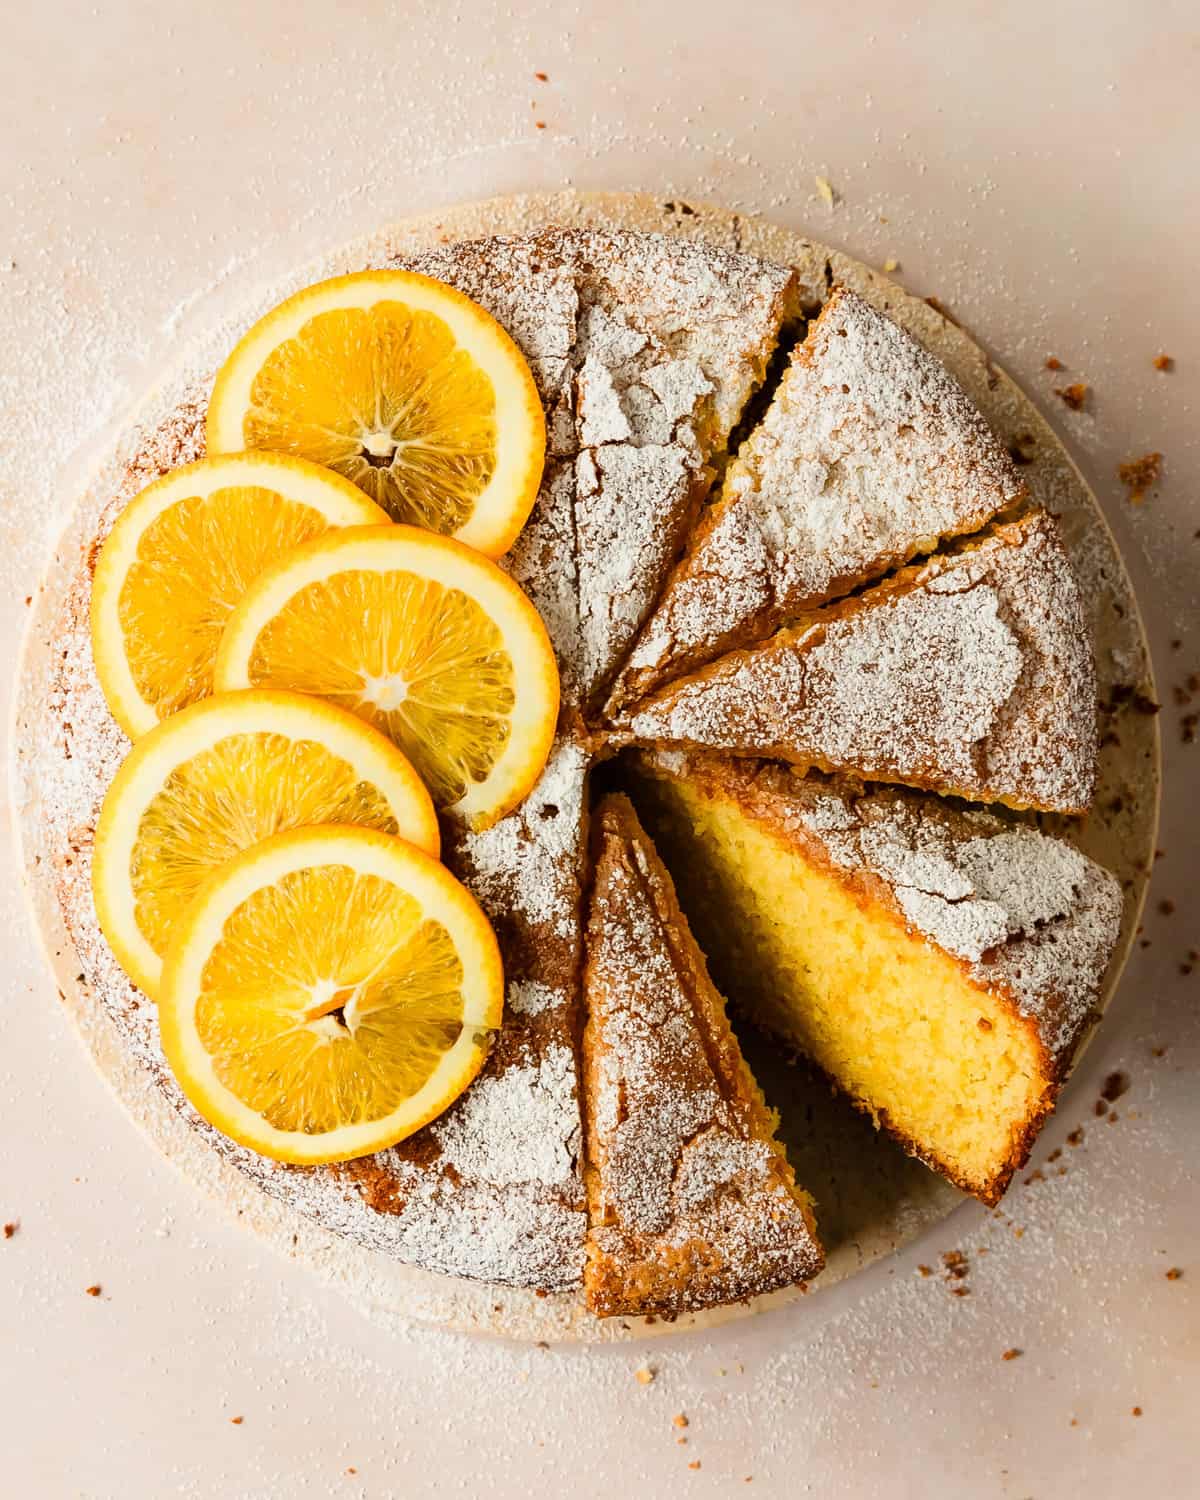 Orange olive oil cake is a deliciously tender and moist olive oil cake infused with bright orange flavor. This olive oil orange cake is made with orange zest and fresh orange juice and has a wonderfully rich and fluffy crumb. Make this citrus olive oil cake anytime you need a simple, but stunning dessert.